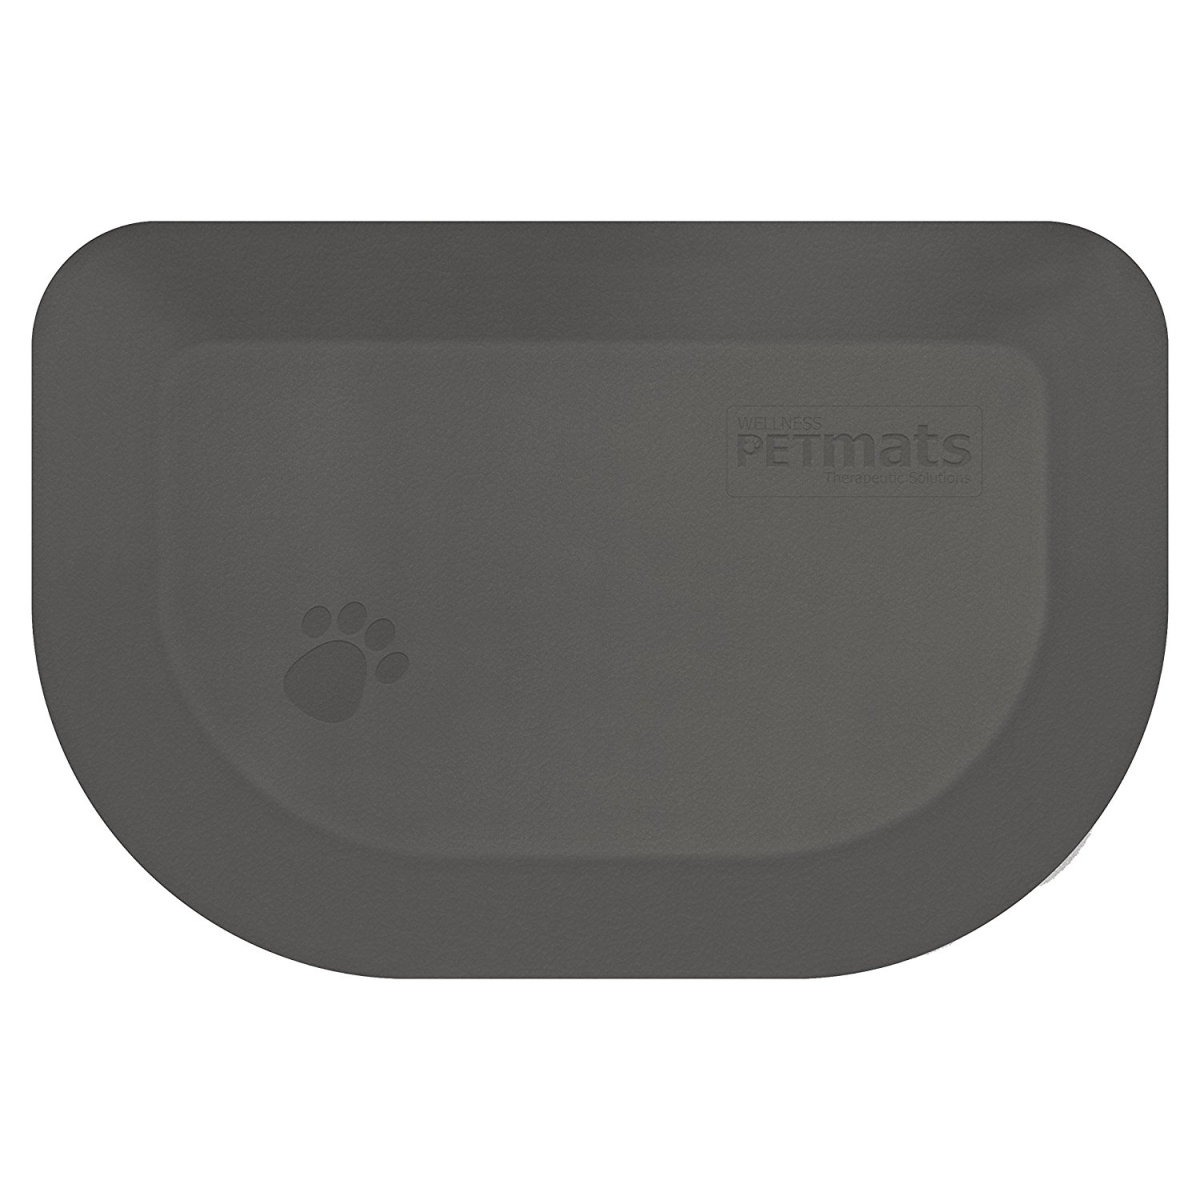 Pm1812rgry Wellness Petmats Rounded Pet Mat For Dogs - Gray Cloud, 18 X 12 X 1 In.